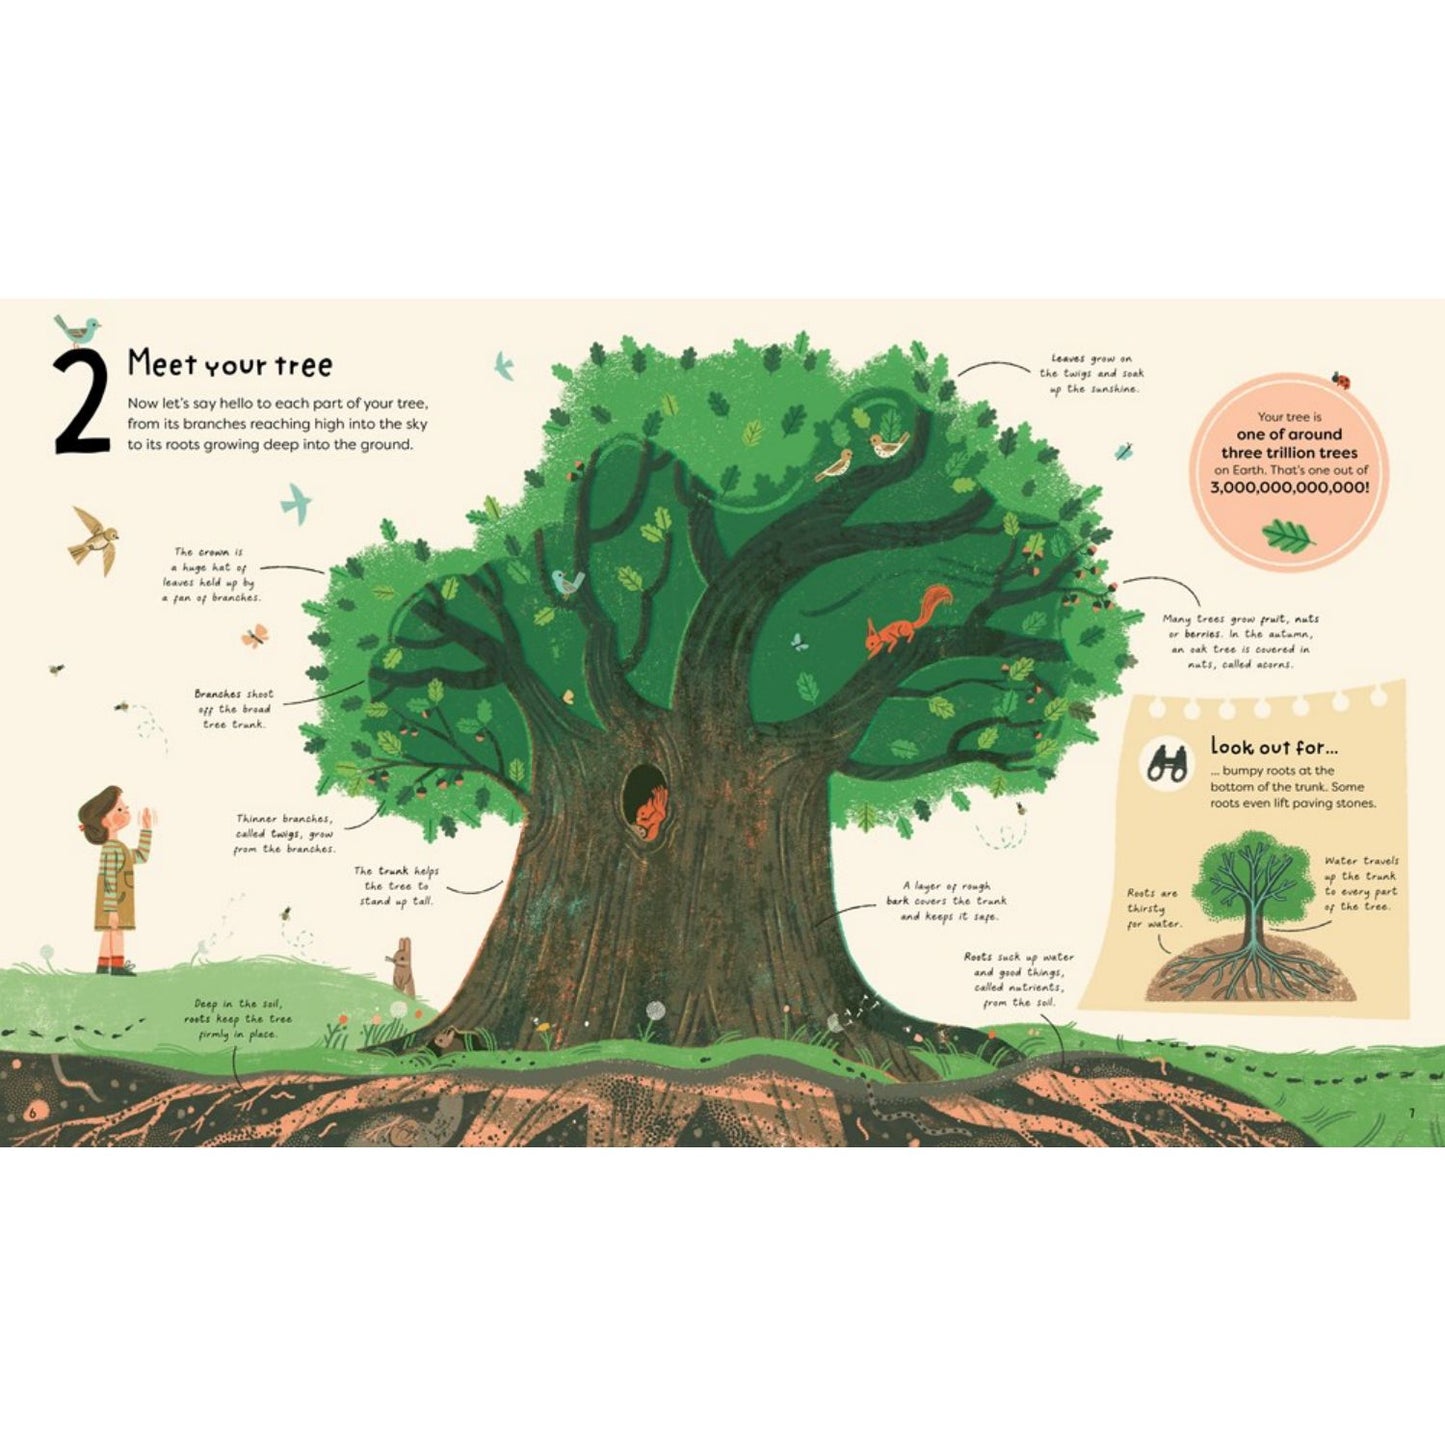 21 Things to Do With a Tree | Children’s Book on Nature